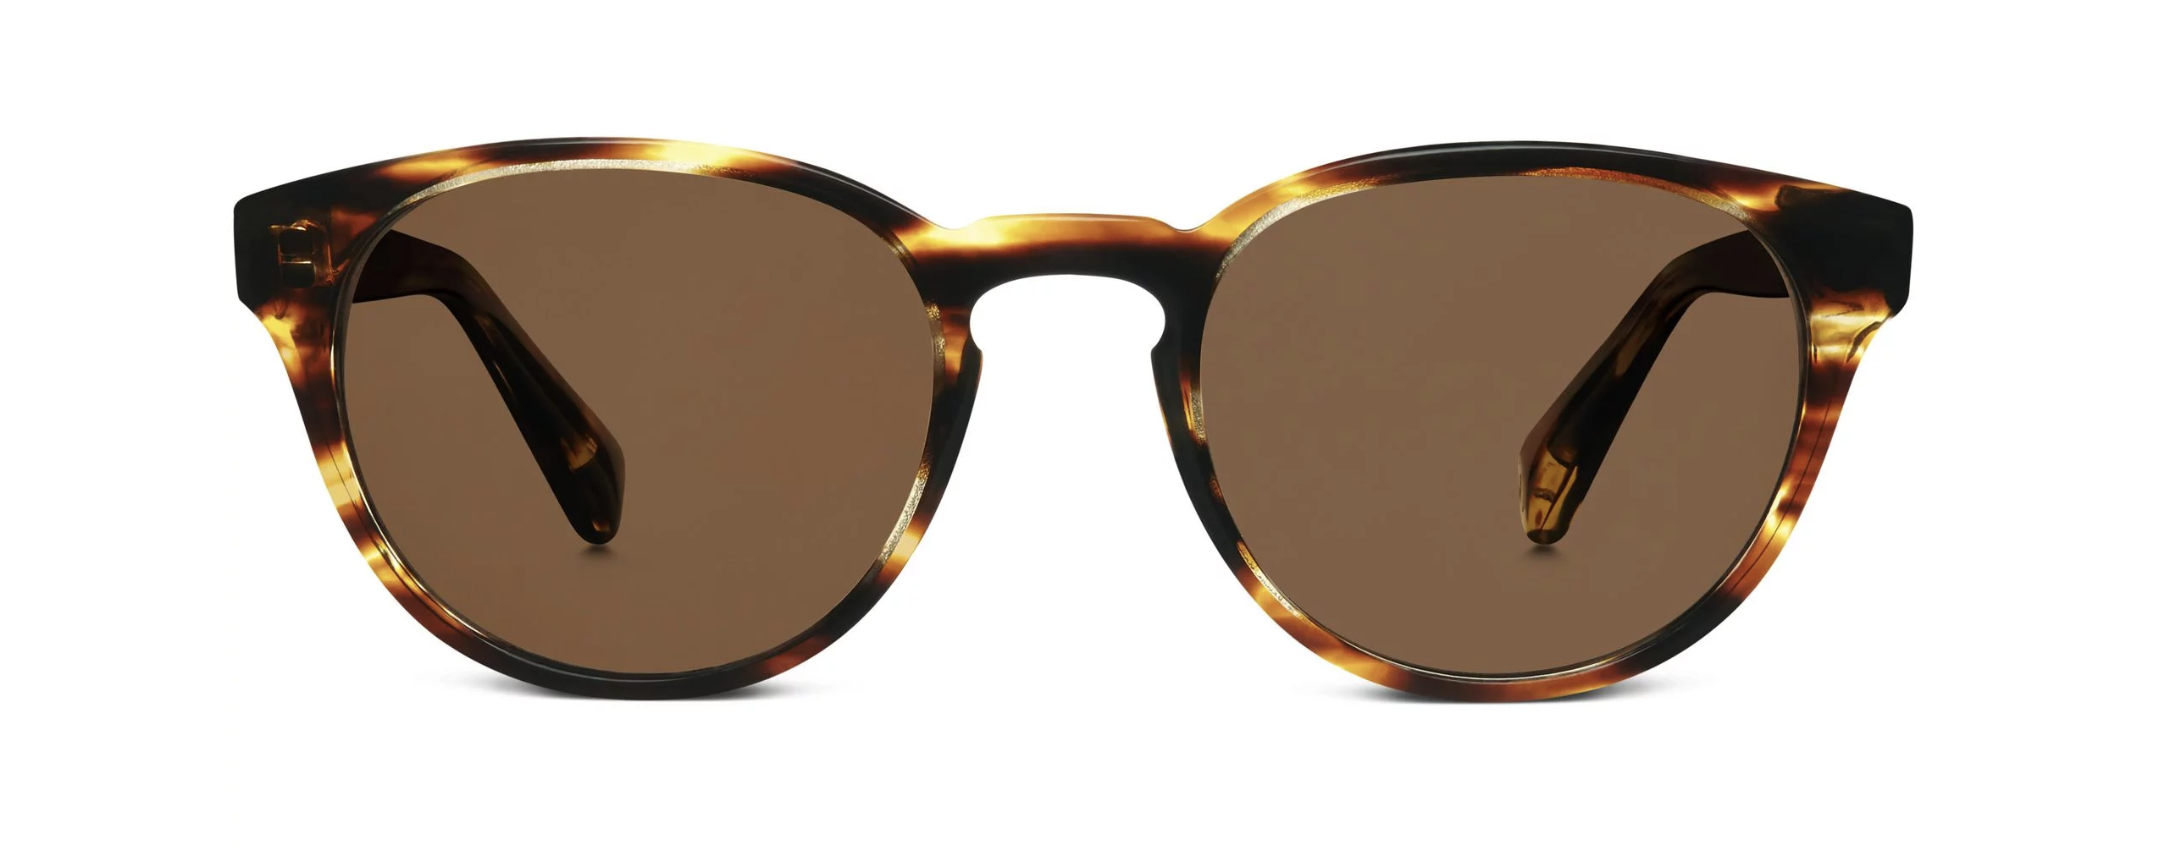 Warby Parker Percy Sunglasses